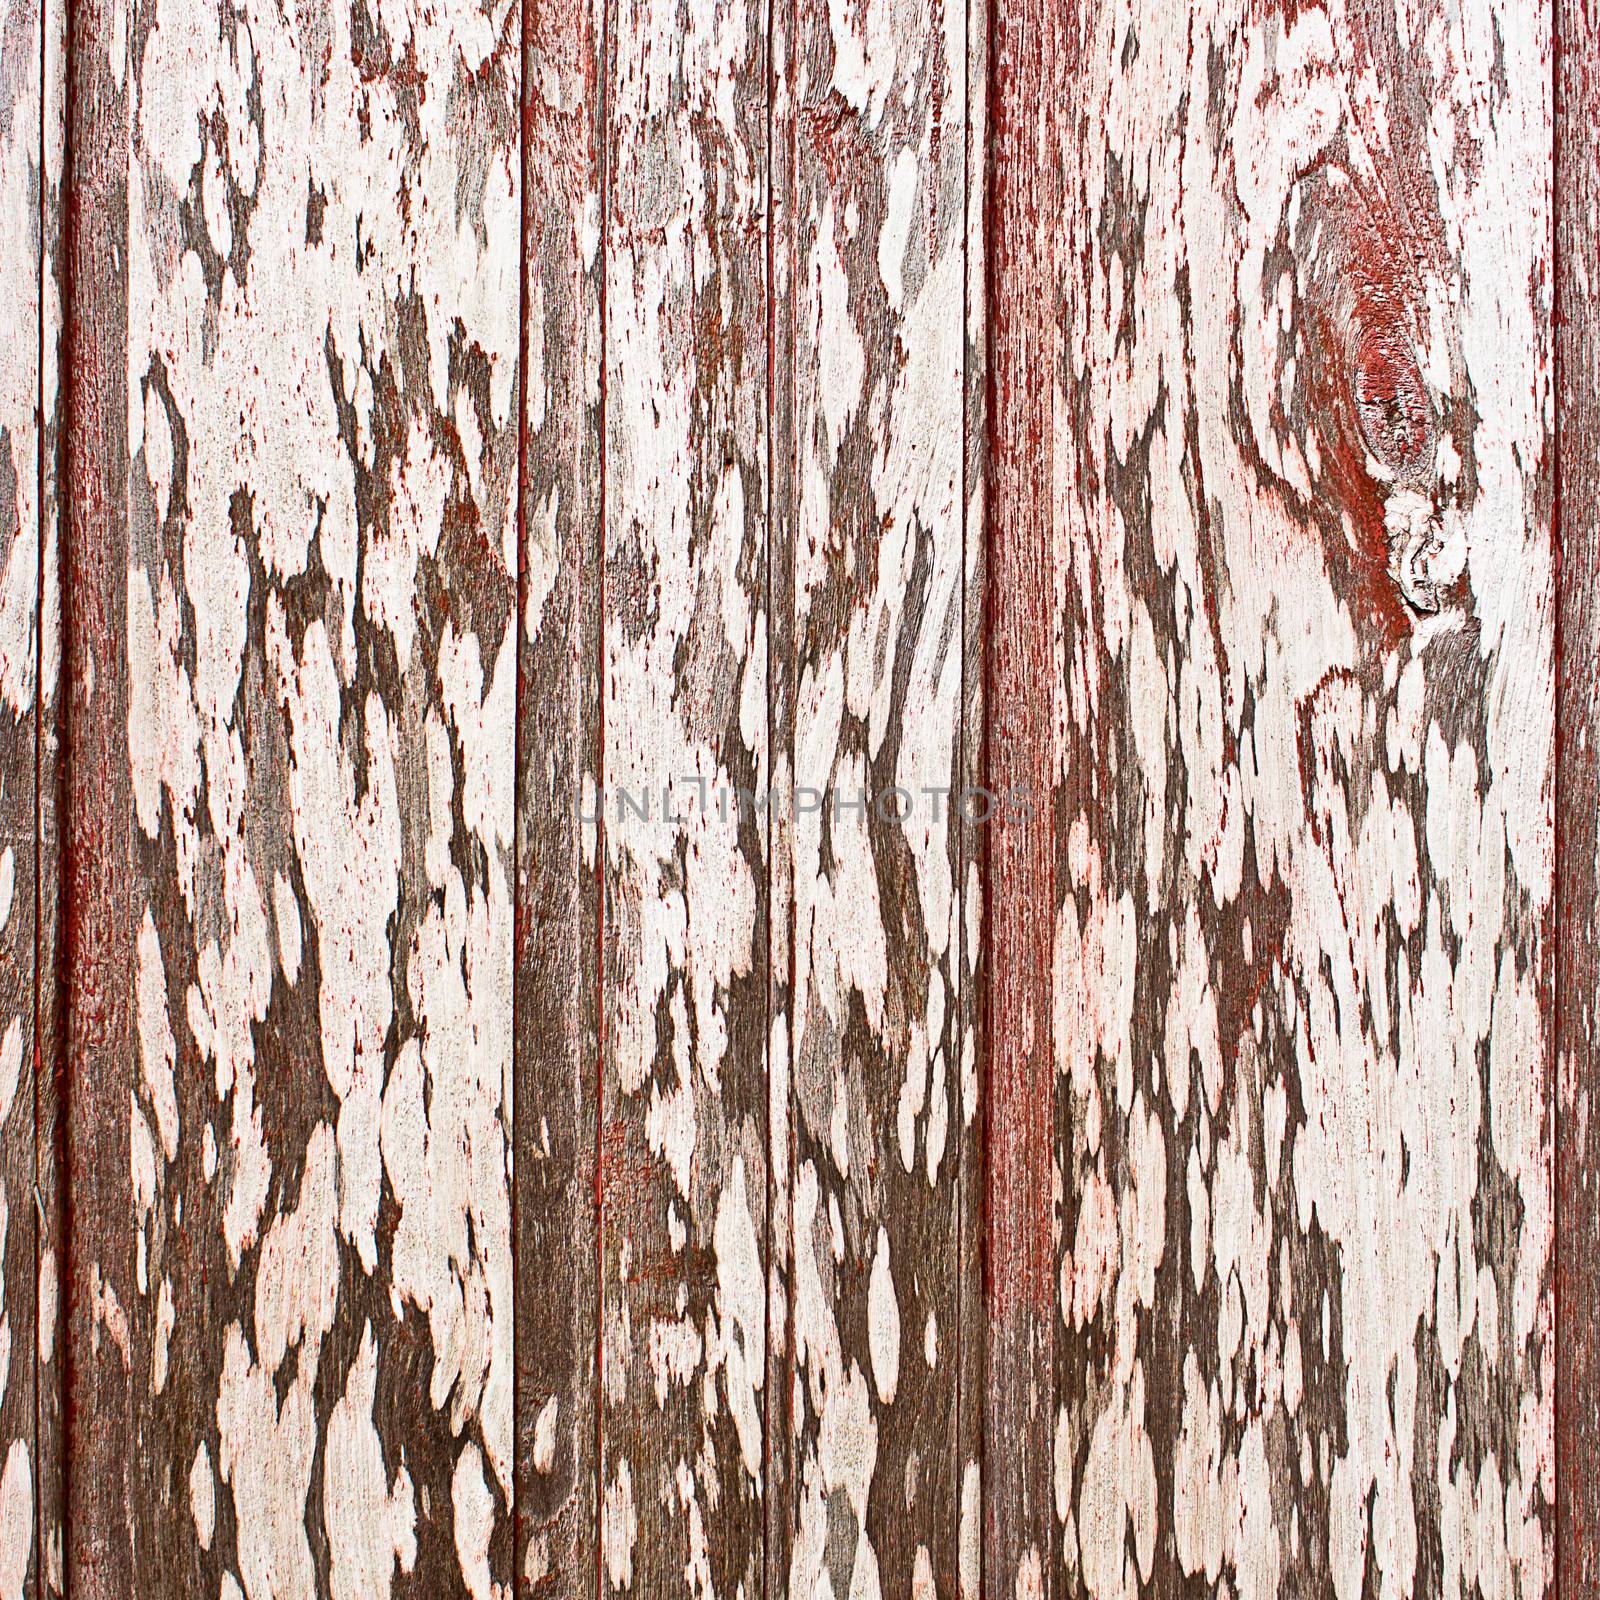 Wooden stain with texture background